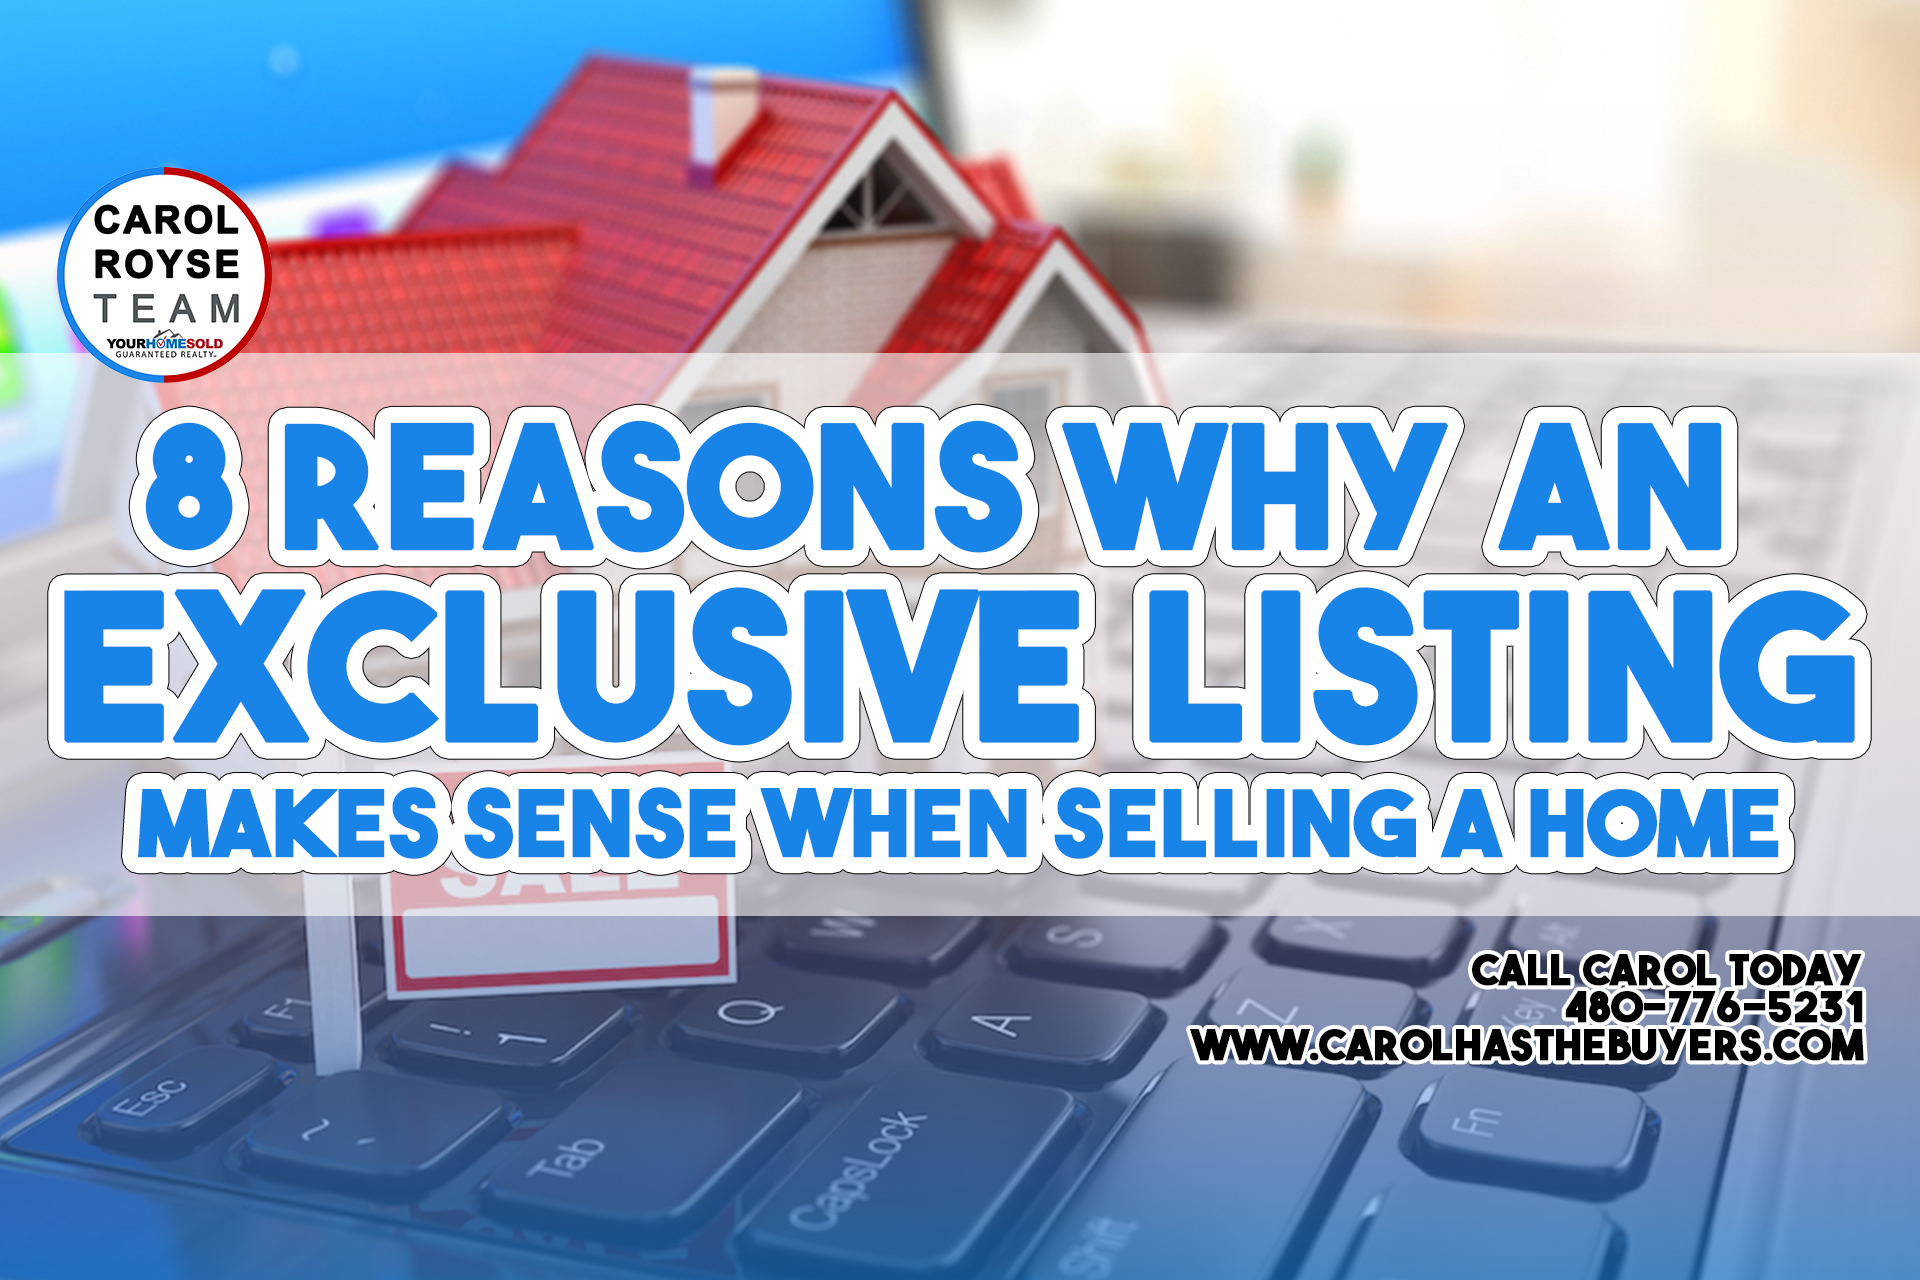 8 Reasons why an Exclusive Listing Makes Sense When Selling a Home